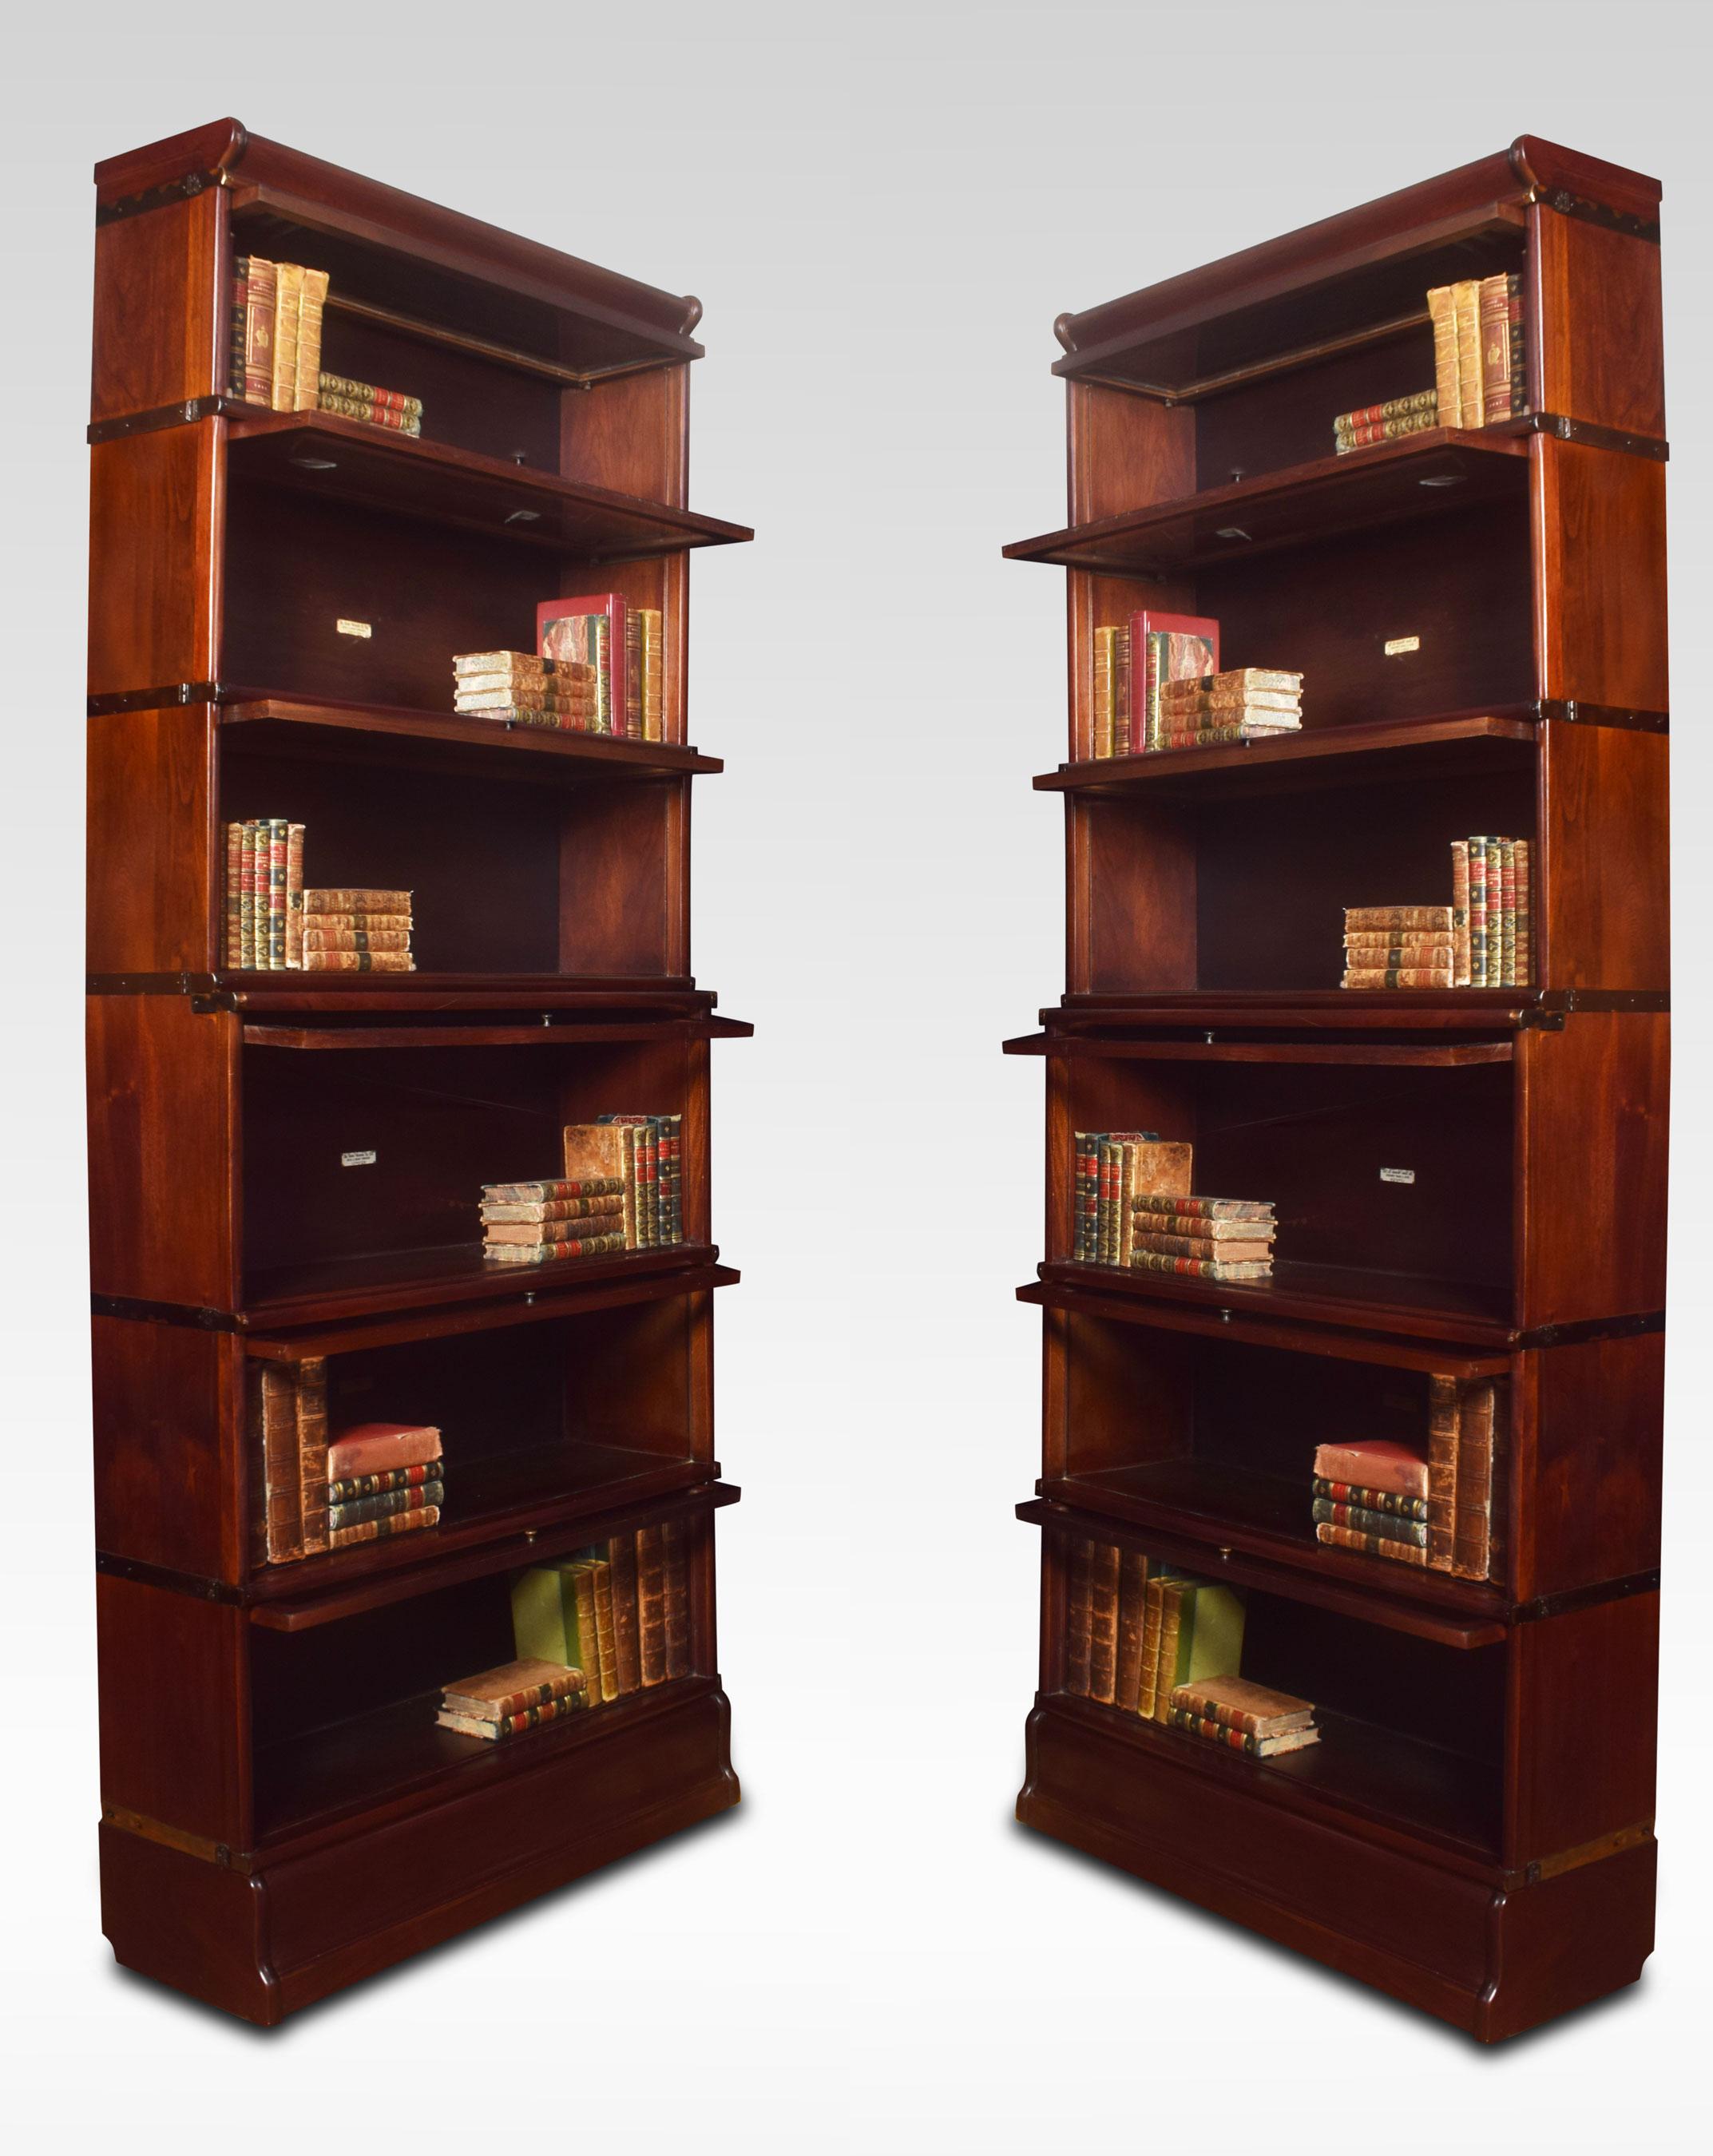 Pair of mahogany globe Wernicke six-section bookcases, the moulded top above six graduated sections all having glazed doors, raised up on plinth base.
Dimensions:
Height 86 inches
Width 34 inches
Depth 13 inches.